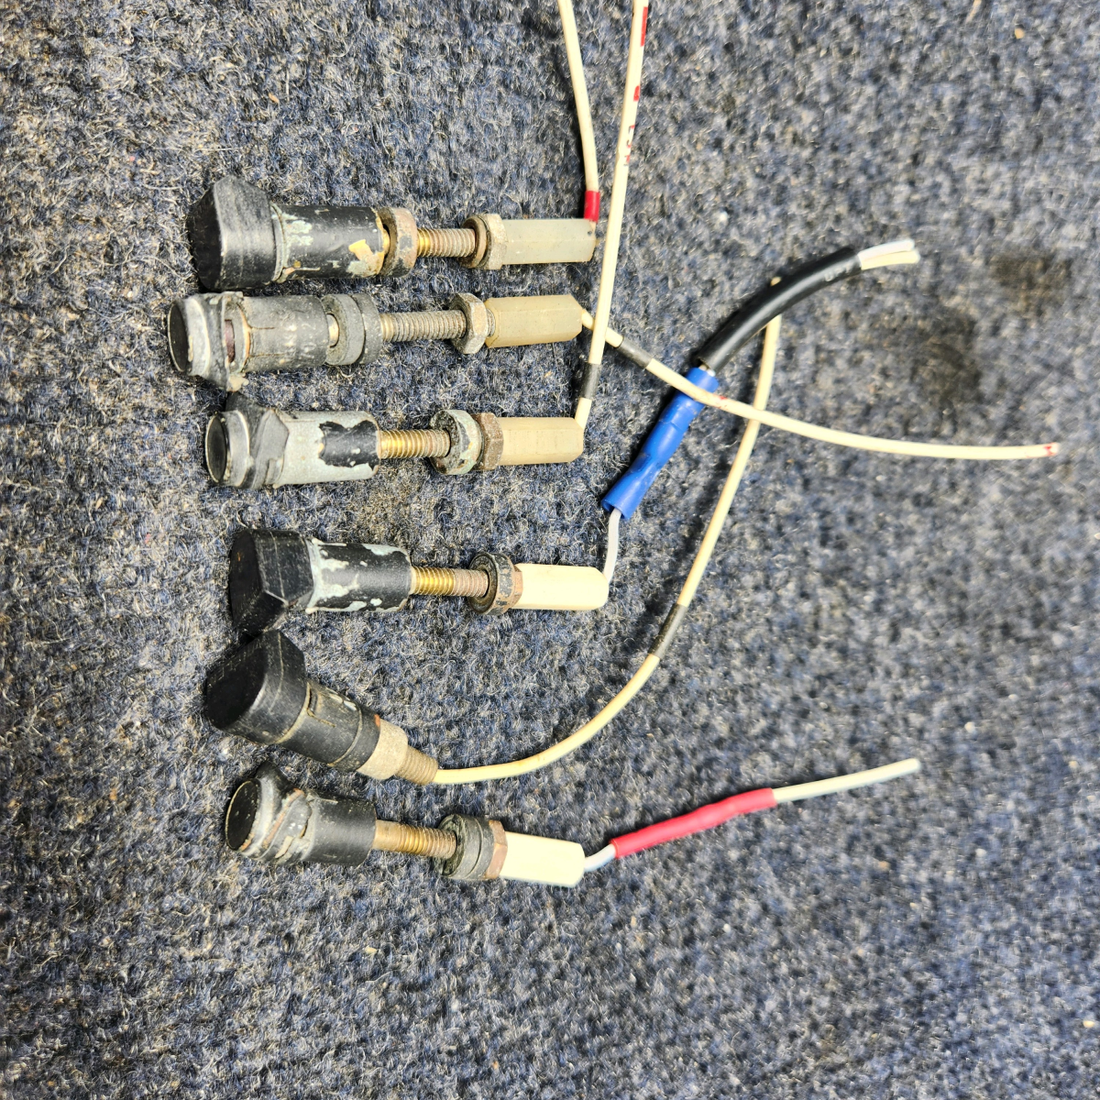 Used aircraft parts for sale, A-6795B BEECHCRAFT F35 GRIMES AIRCRAFT INSTRUMENT POST LIGHT 12 VOLTS SET OF  6